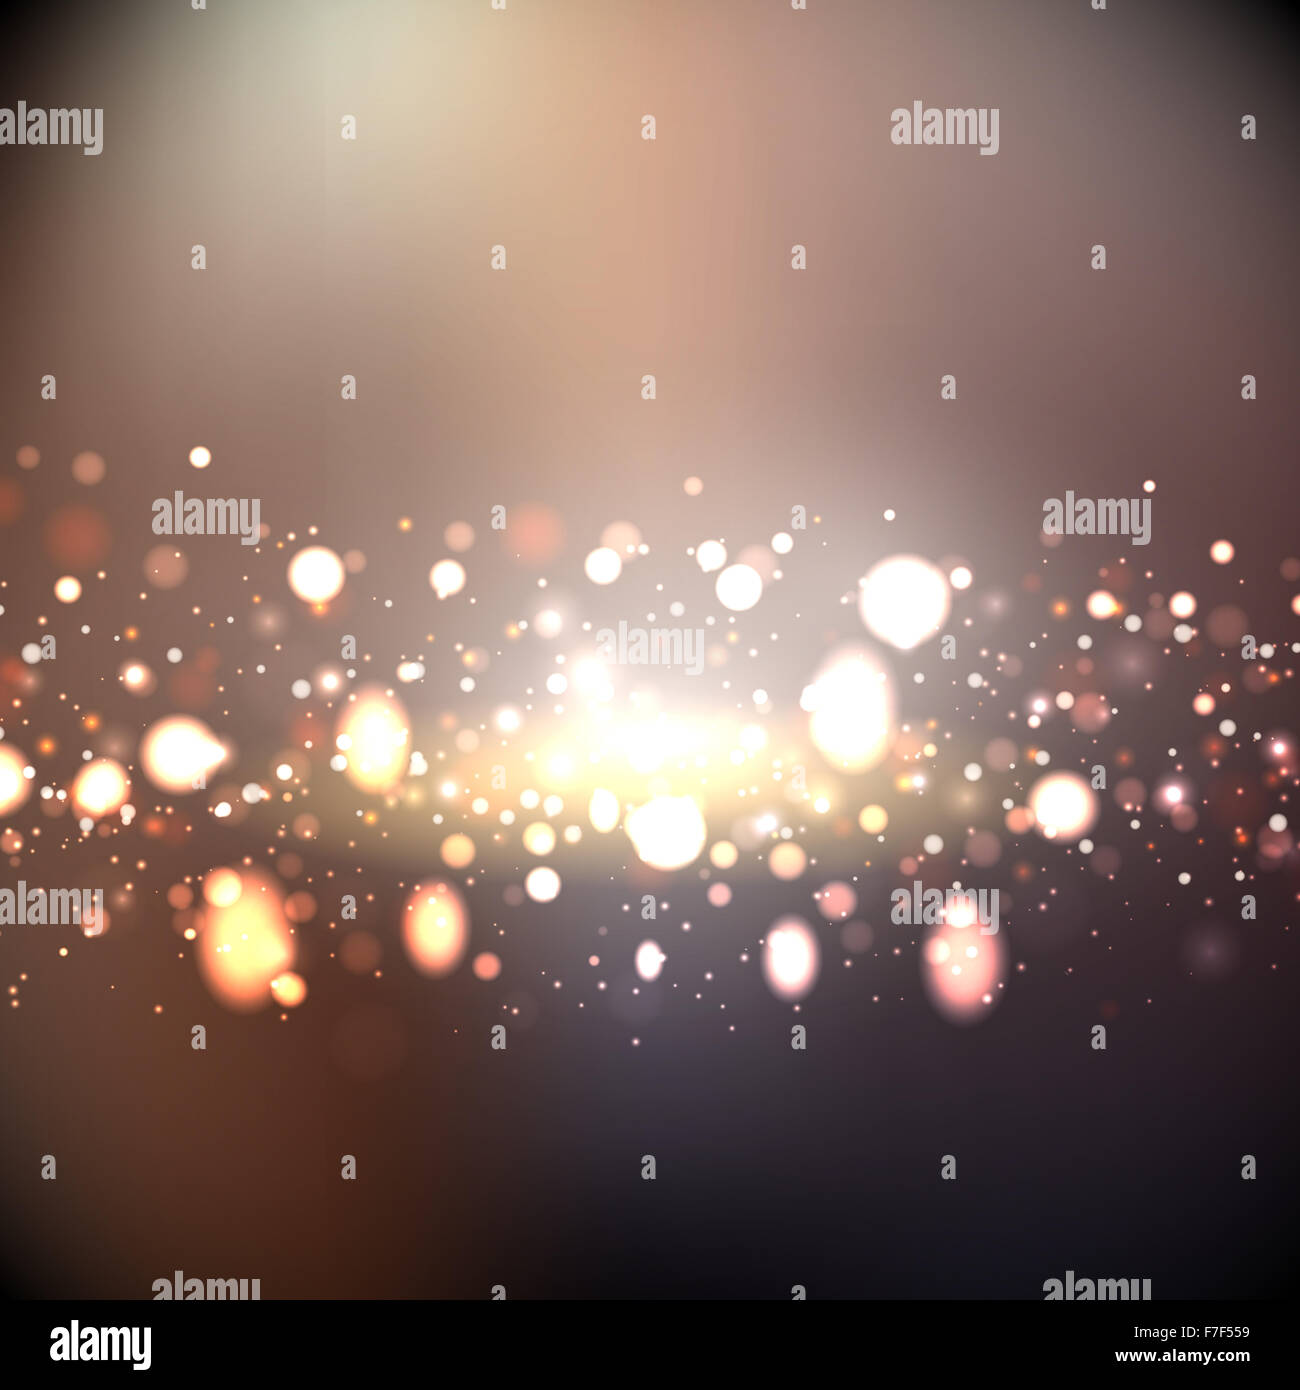 Decorative background with abstract lights design Stock Photo